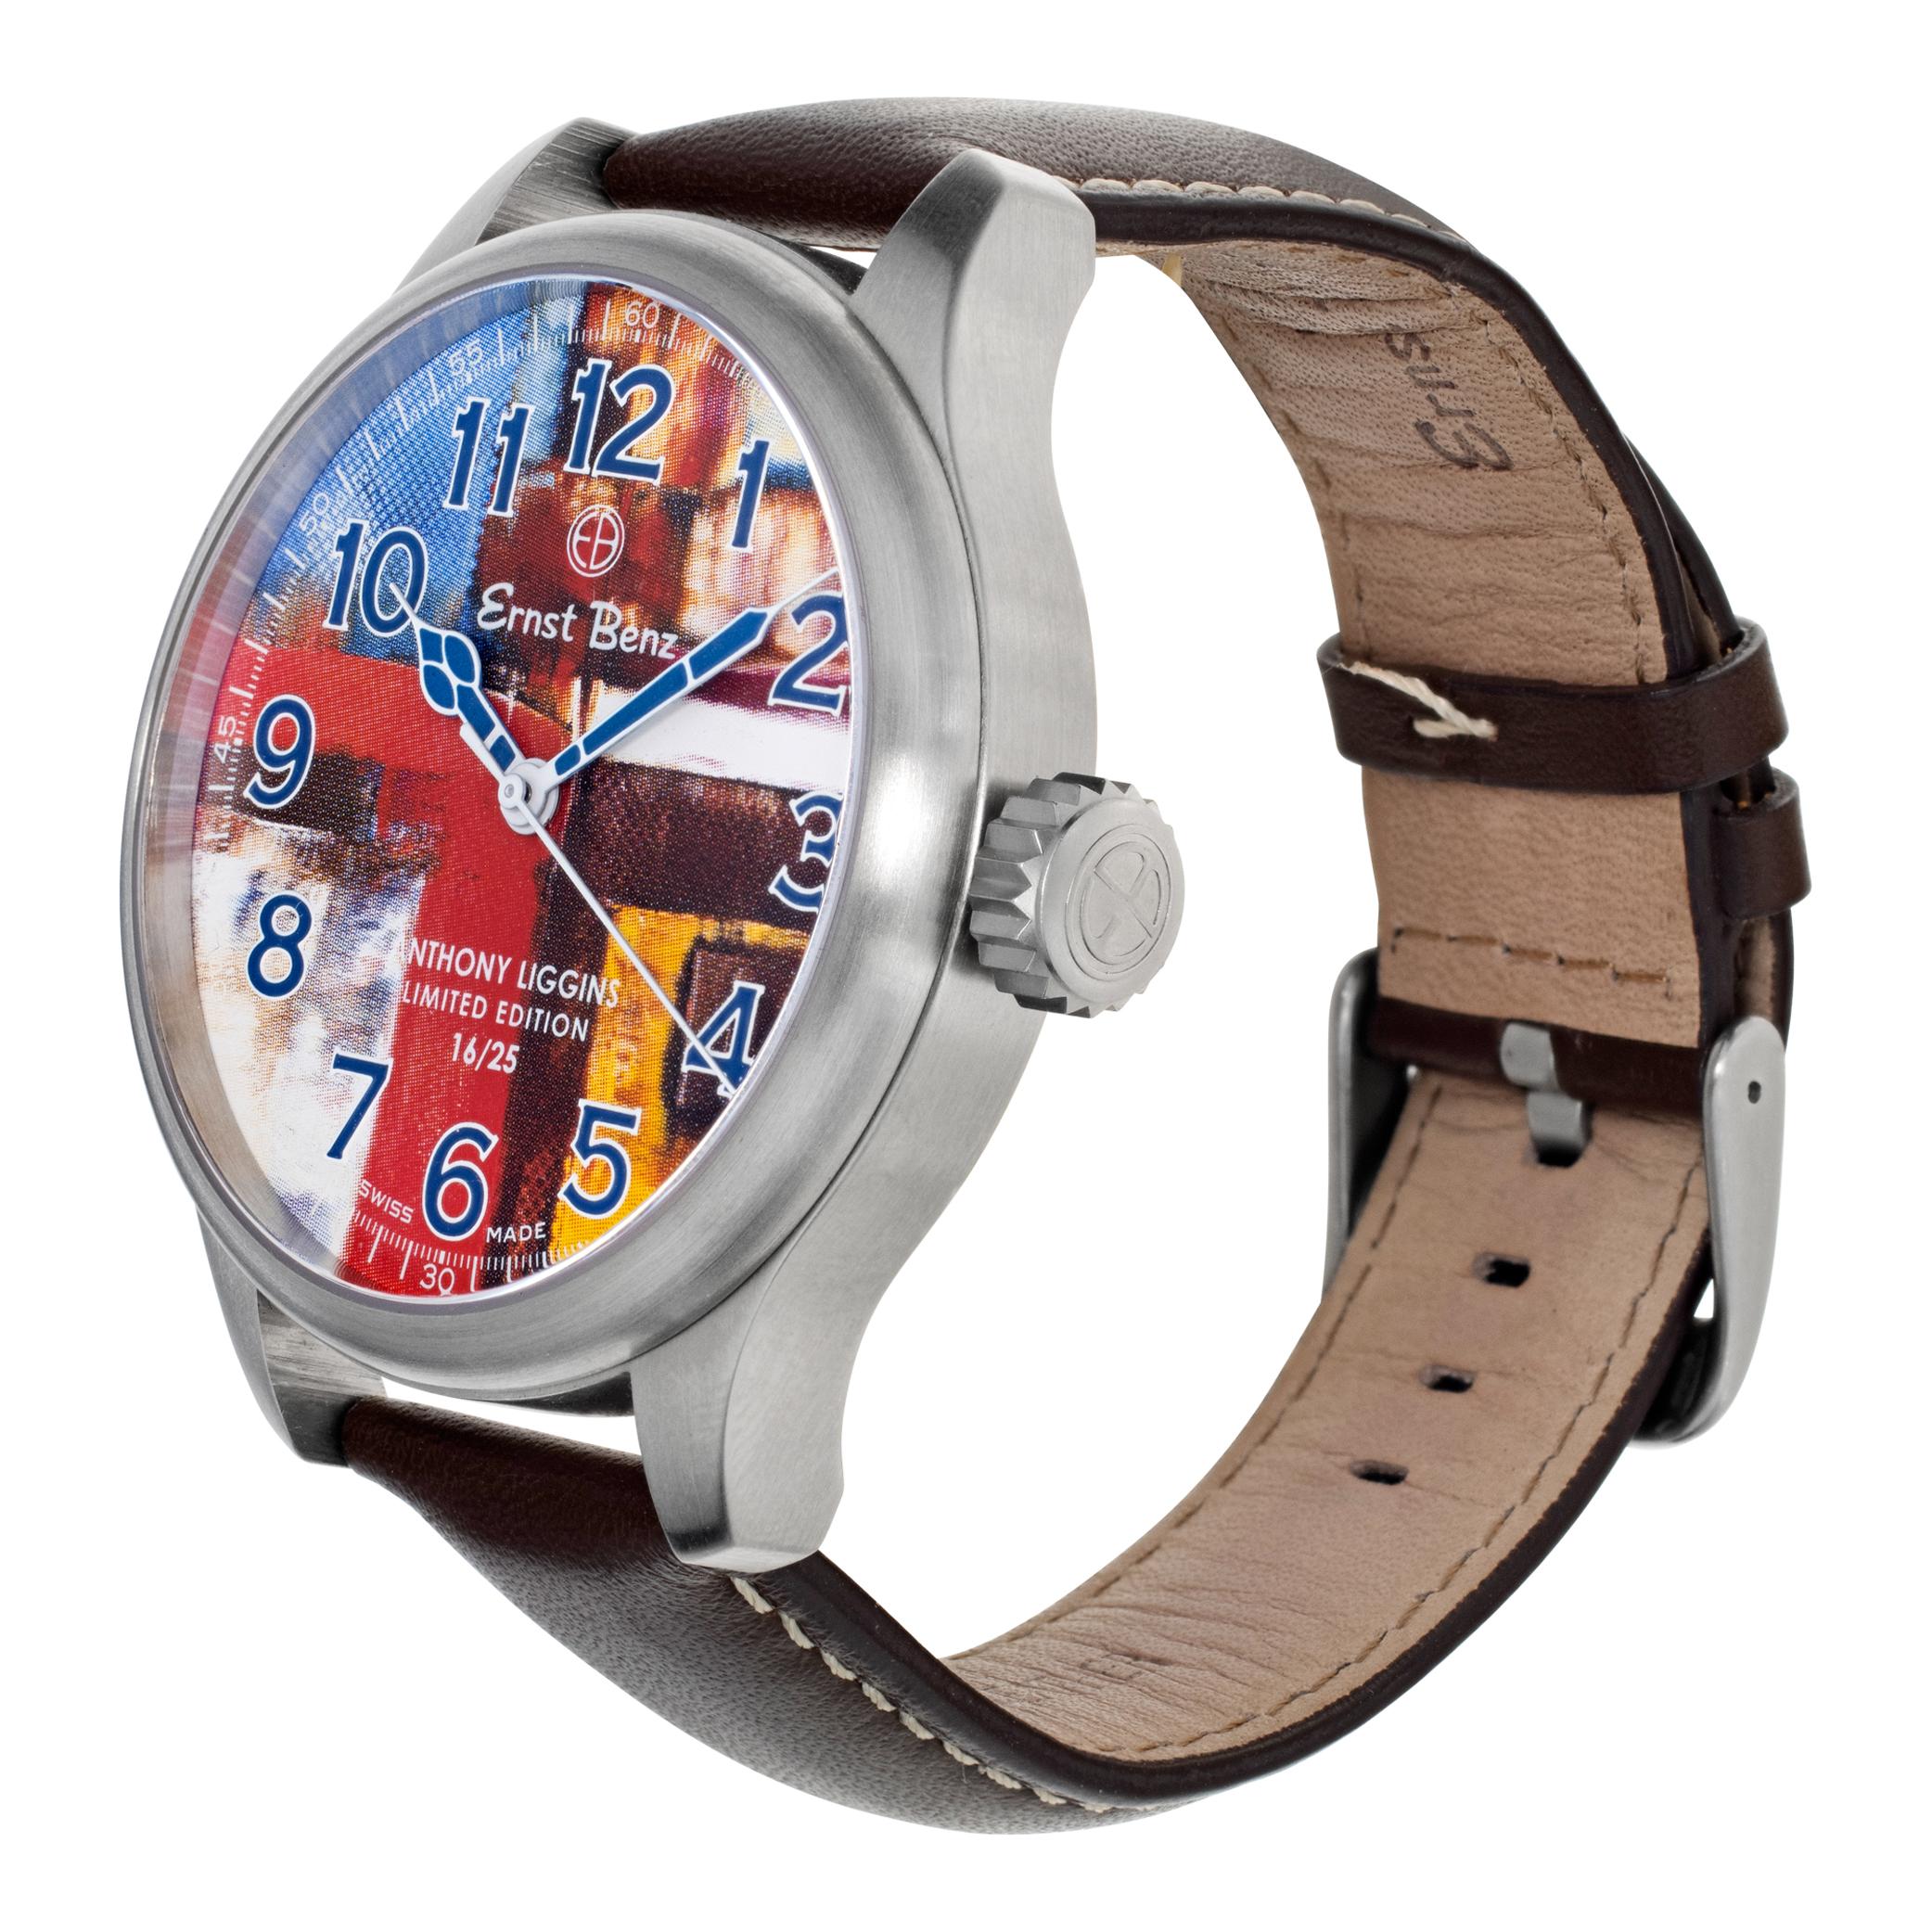 Ernst Benz Chronosport Art Multi-Color Anthony Liggins in stainless steel on leather strap. Auto w/ sweep seconds. 47 mm case size. Limited edition only 25 made.Unused with box and papers. Ref GC10200-AL Fine Unused Ernst Benz Watch.

 Unused Sport